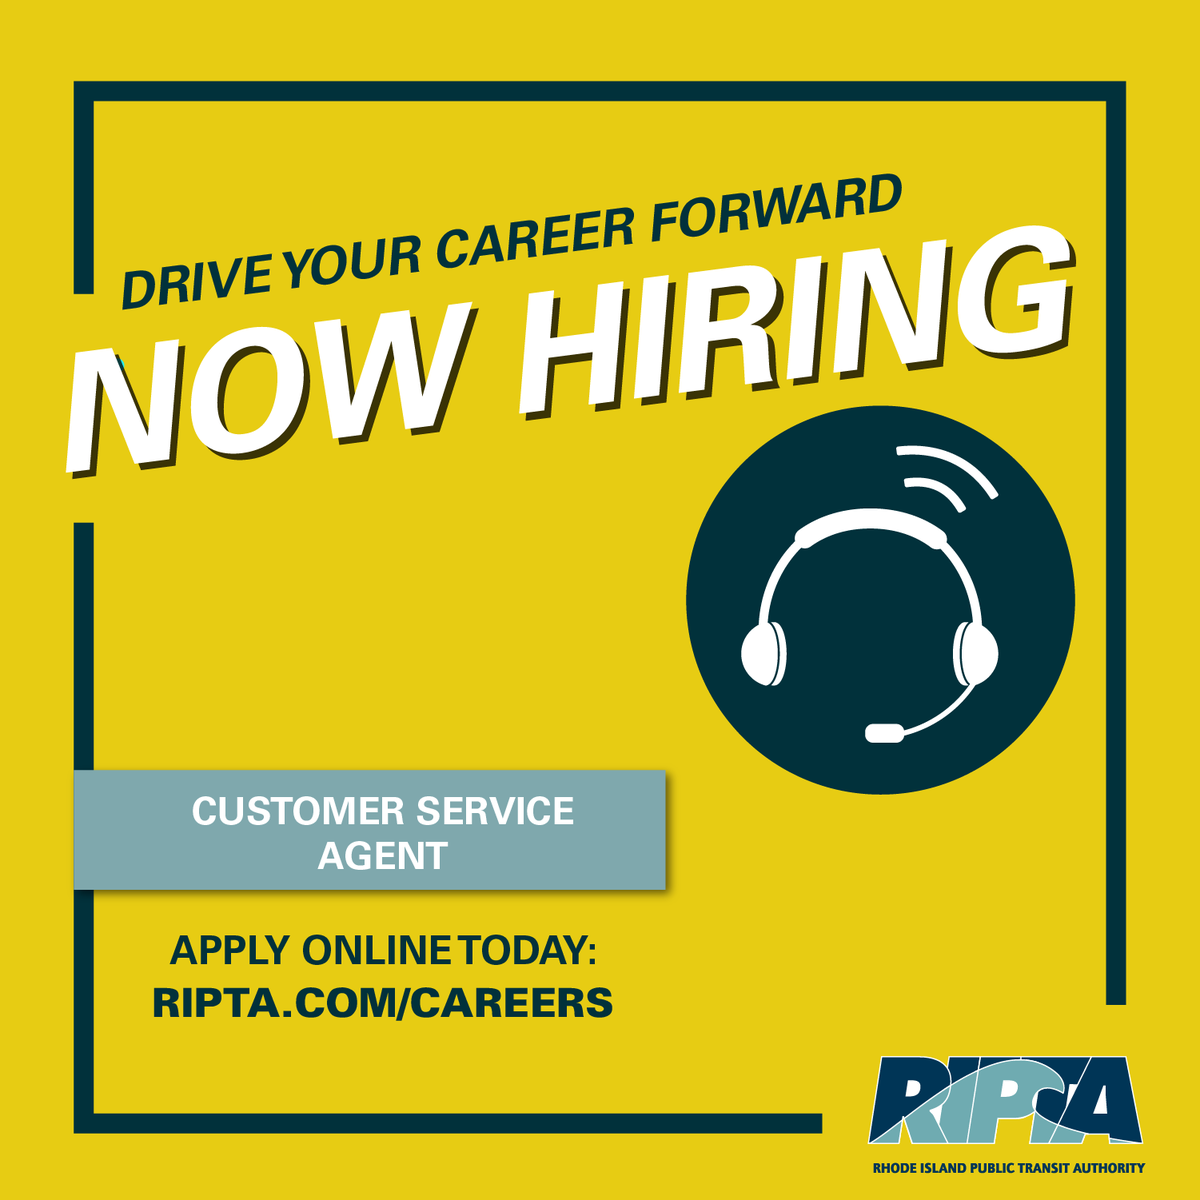 Shift your career into gear at RIPTA today! 🚌 We are currently hiring for the position of Customer Service Agent within our RIde paratransit division. Stop by our job fair tomorrow, May 1 from 10am-3pm at RIPTA Headquarters or apply online at: RIPTA.com/careers